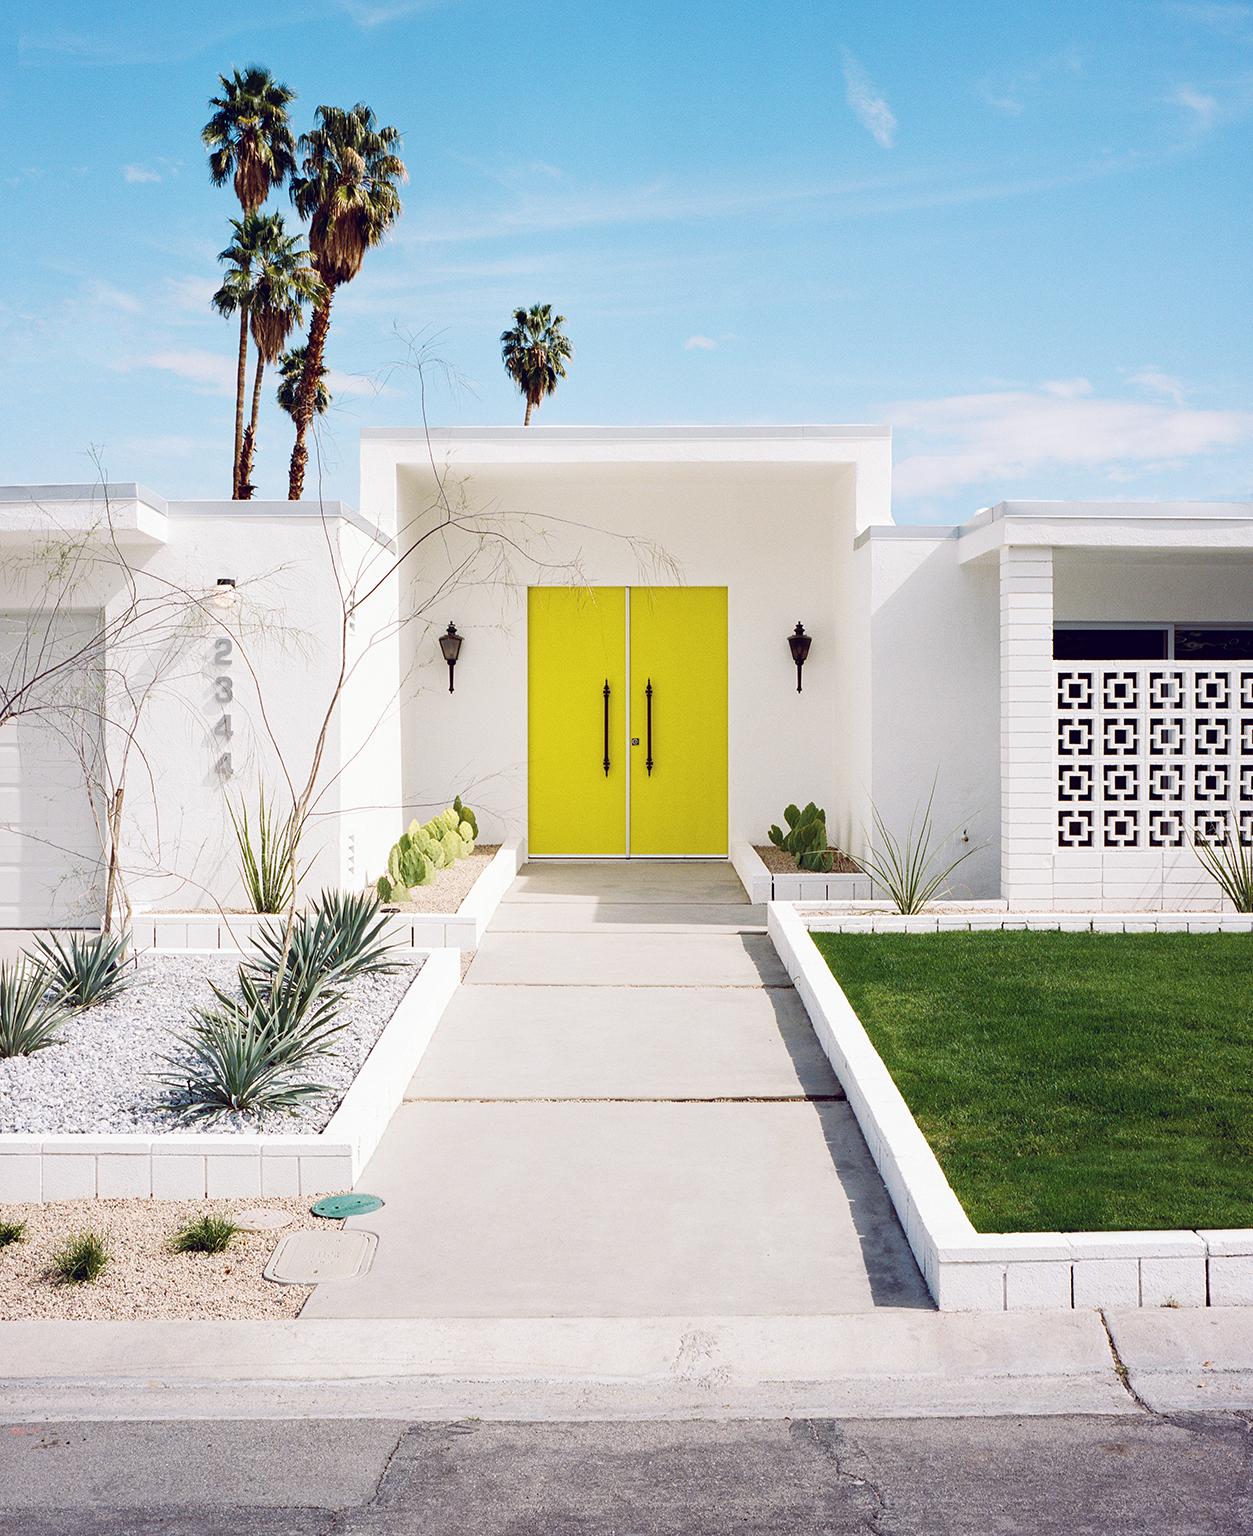 Yellow Door, Palm Springs, CA., 2017. Dye Piment Print. 24” x 30”, Edition of 15.
_________________________________________________________________________________
Signed, Dated and Numbered on the Reverse.

Jim Ryce has focused on the beauty, irony